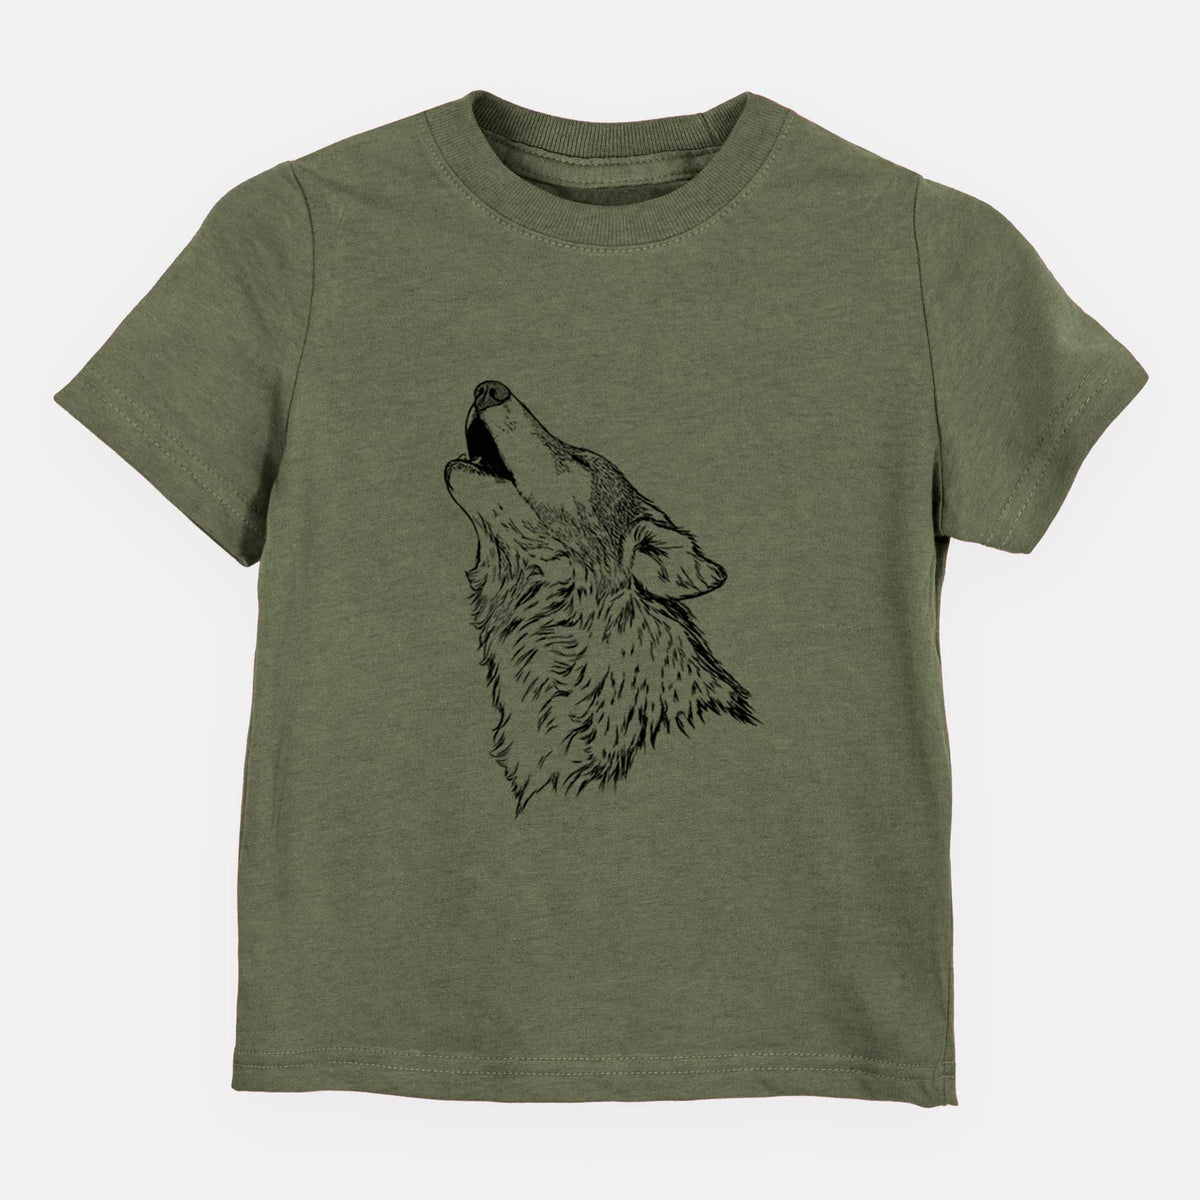 Canis lupus - Grey Wolf Howling - Kids Shirt